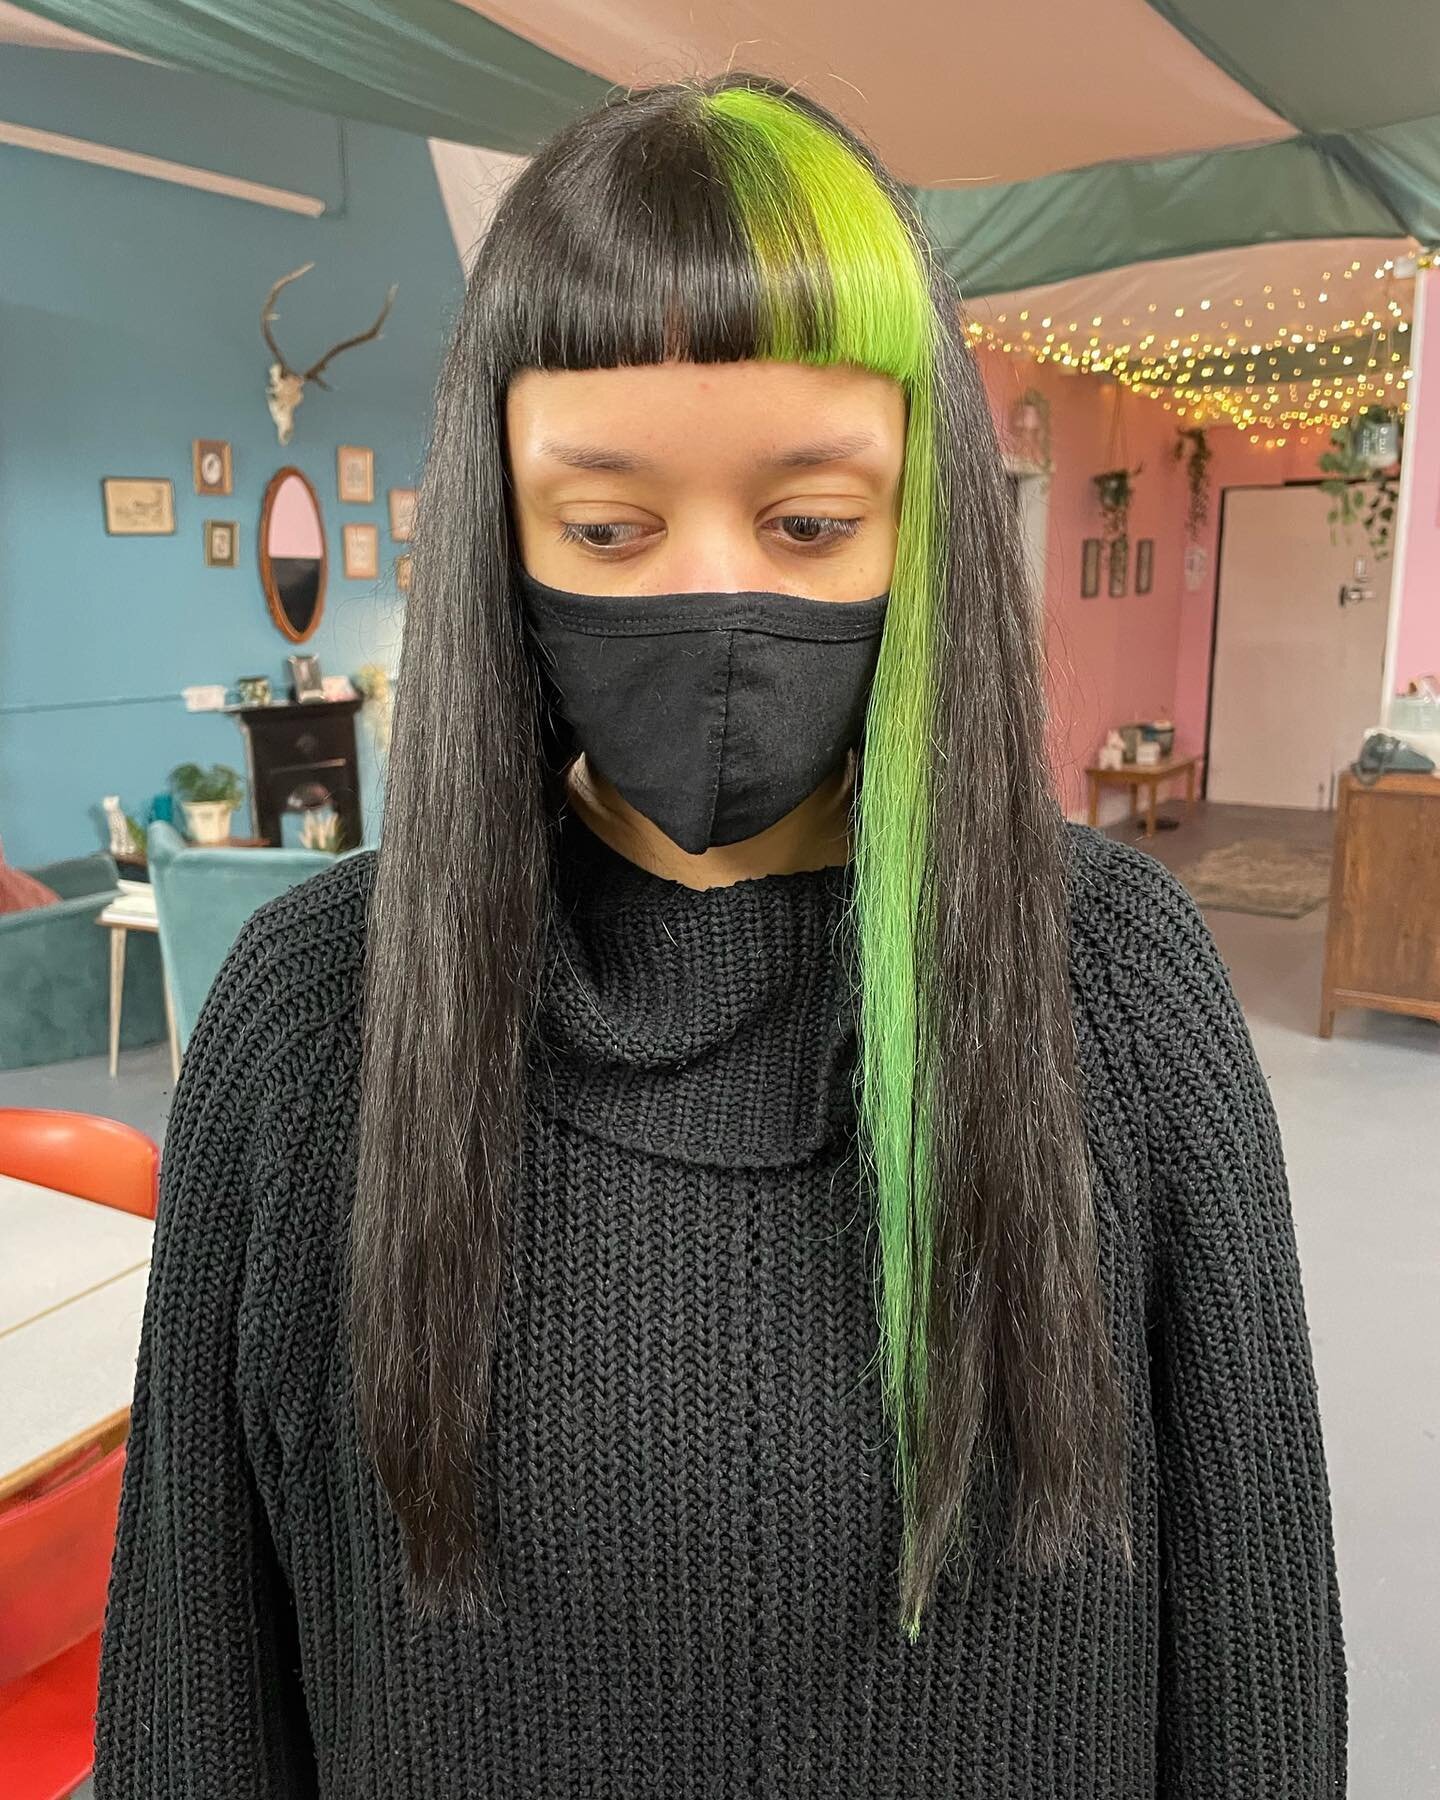 Still can&rsquo;t get over how great this pop of green looks 😍 
.
.
.
.
.
#hair #brighthair #greenhair 
#hair #hairdresser #manchester #hairstylist #haircolourist #haircolor #manchesterhairdresser #haircolourist #hairstylist #wellauk #heartbreakhair